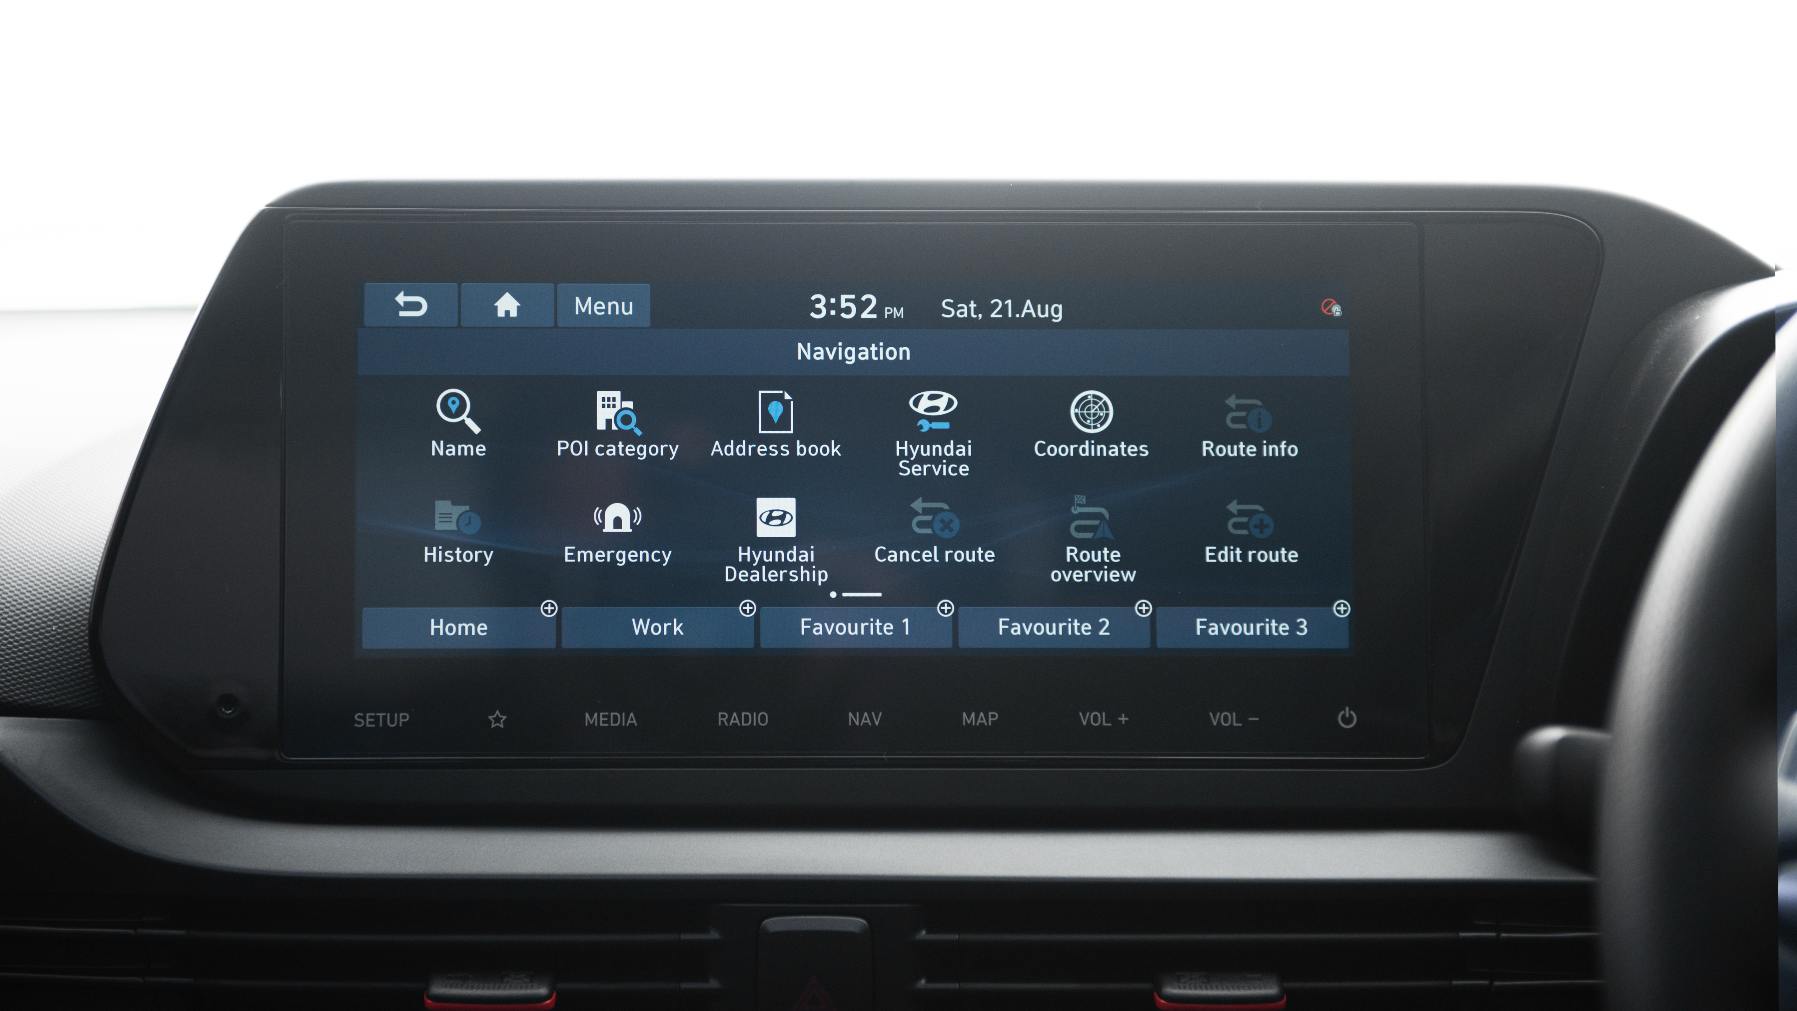 The 10.25-inch screen is legible in all conditions, and works seamlessly. Image: Hyundai